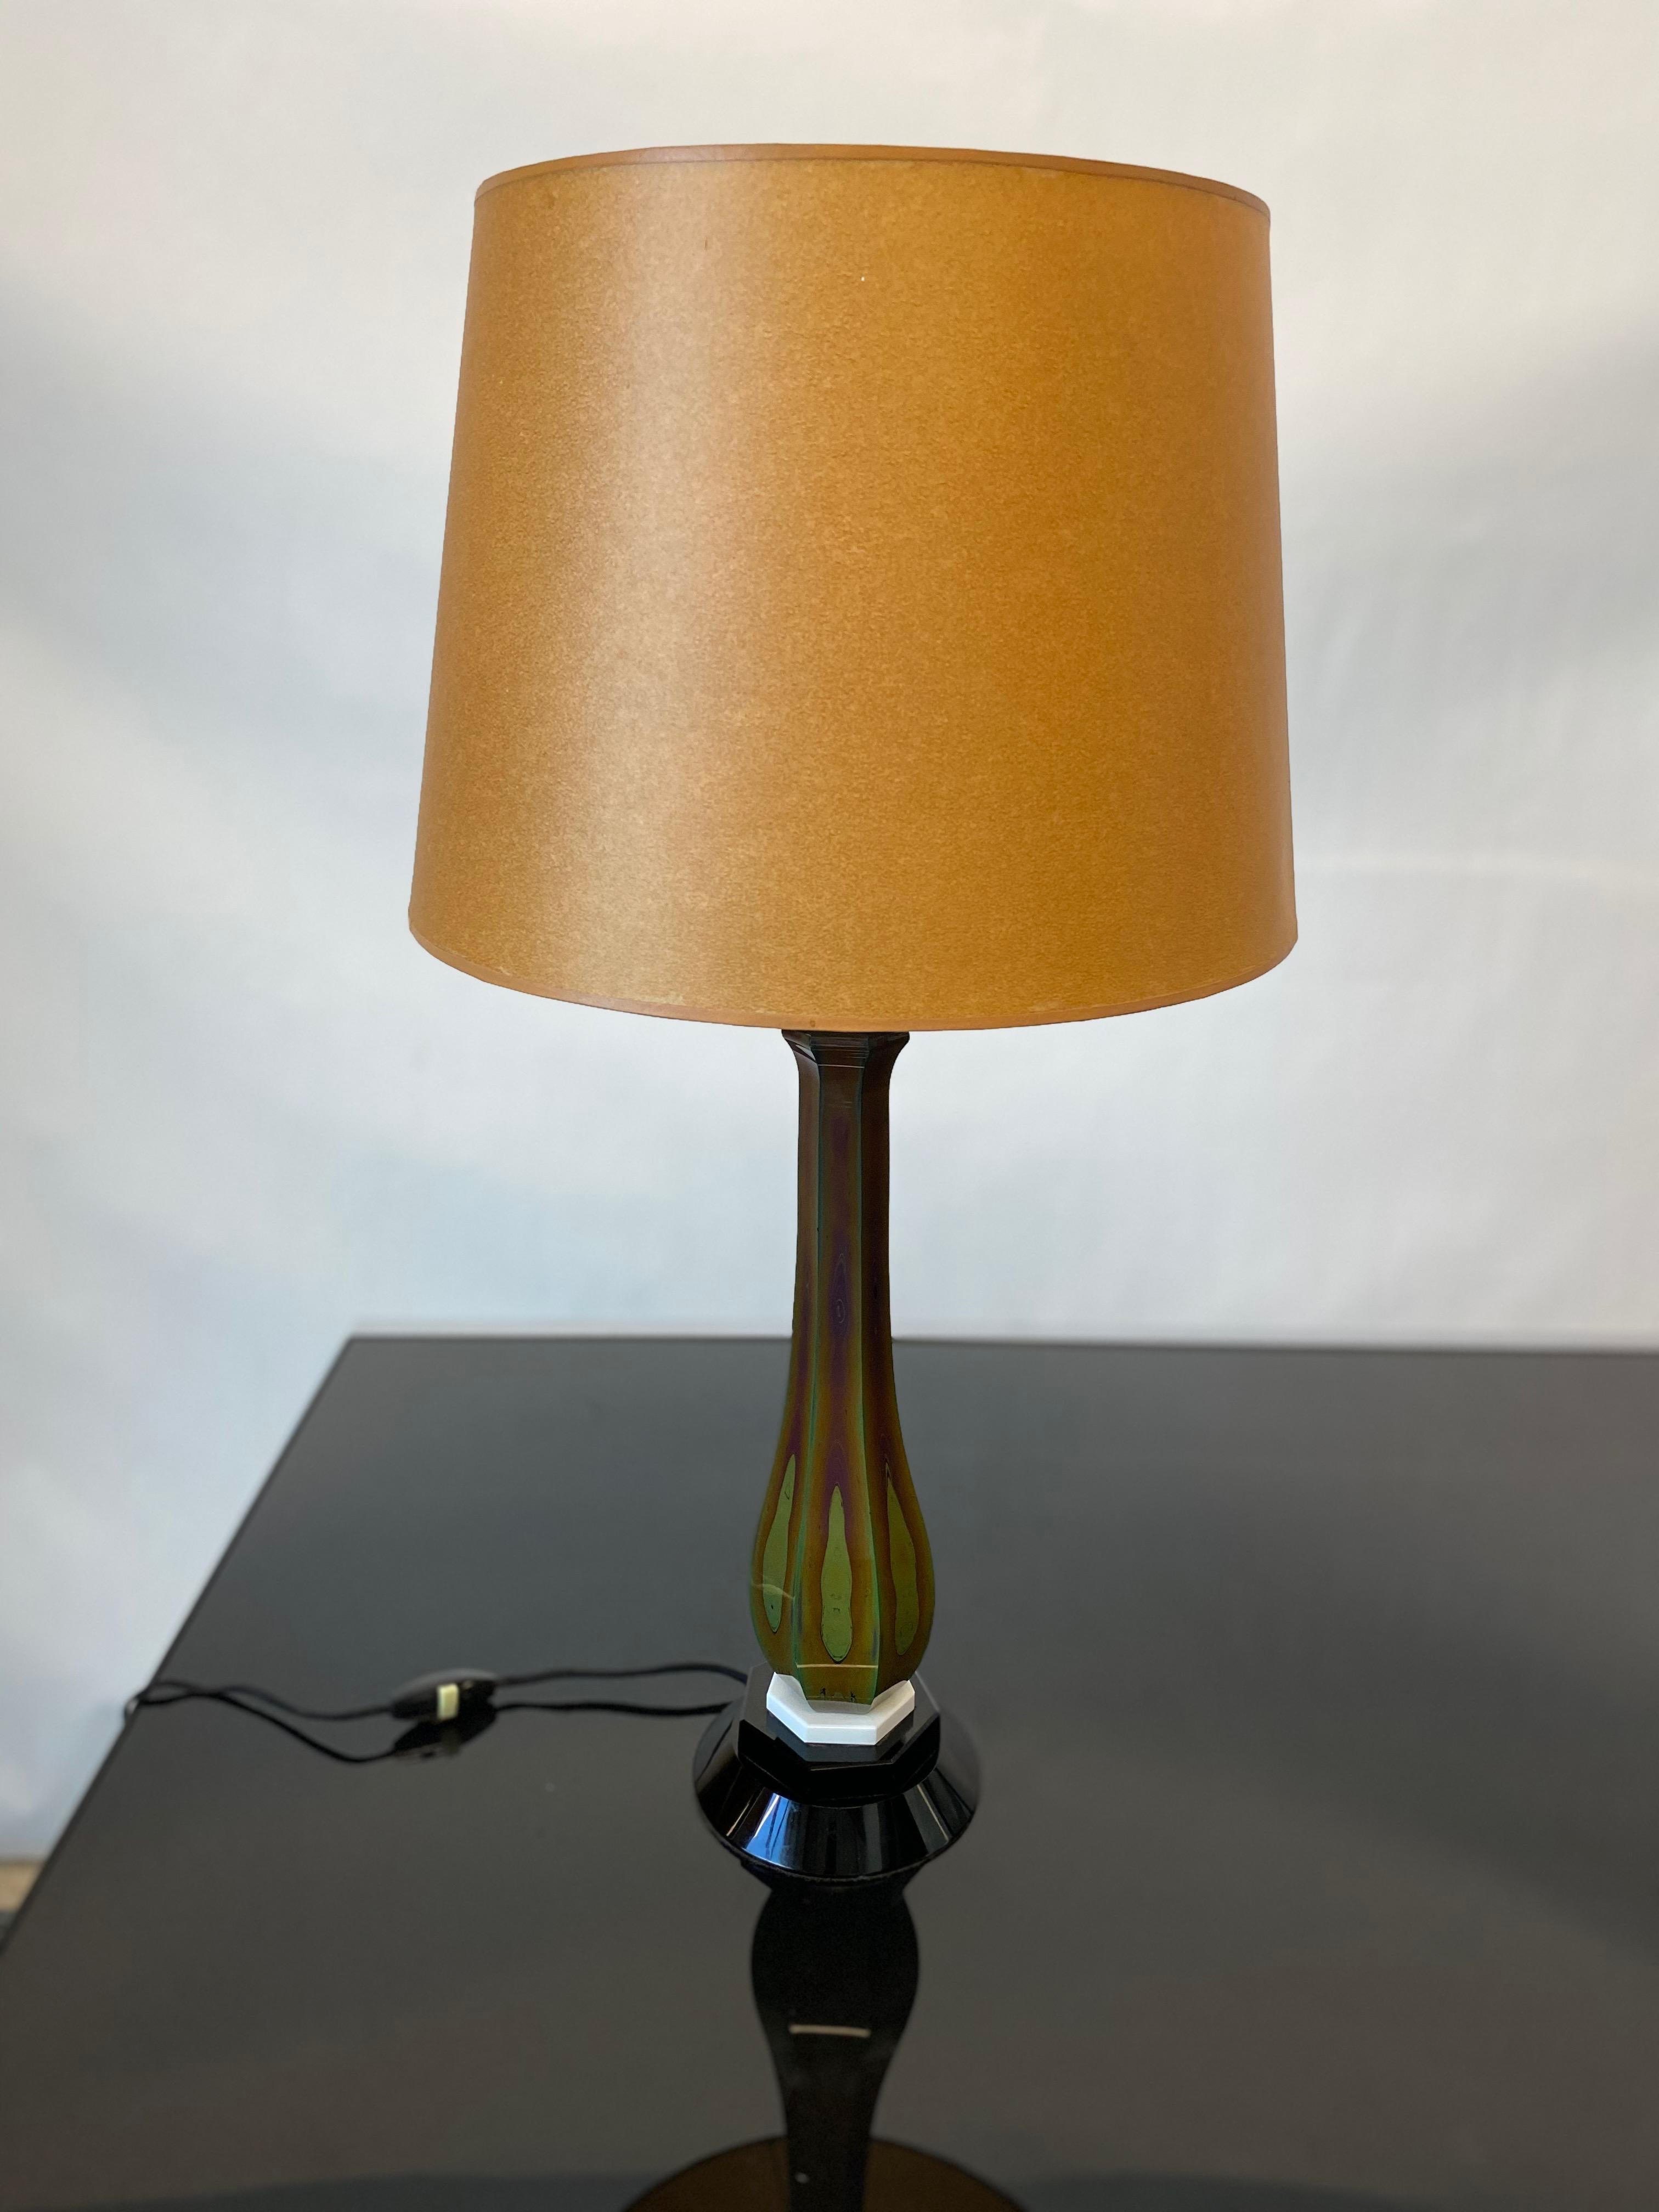 This vintage 1930s fine French Art Deco multicolored cut glass table lamp is in overall good condition. A few minor chips. Refer to photos.
Dimensions:
5.5